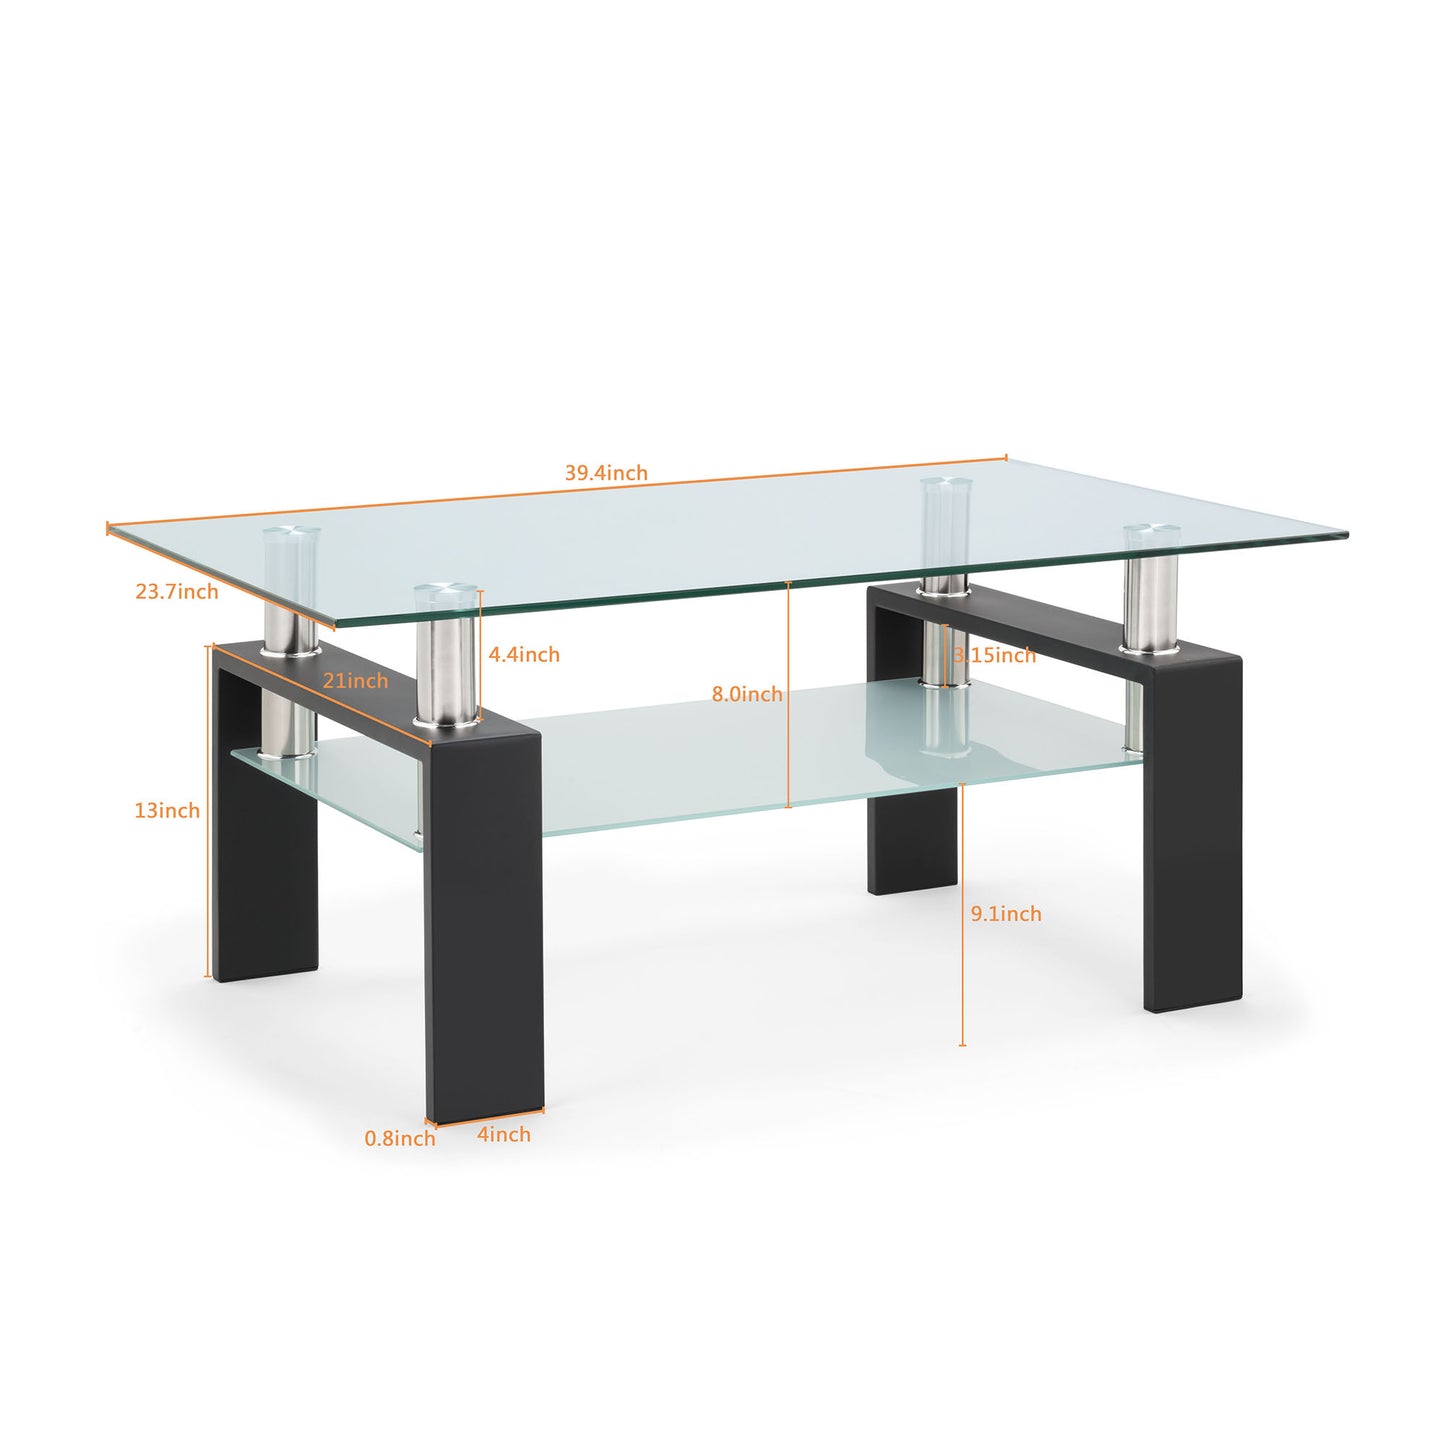 Rectangle Glass Coffee Table, Modern Side Center Table with Shelf & Metal Legs, Mid-Century Tempered Glass Top Tea Table for Living Room, Home Furniture Cocktail Coffee Table - Clear, B1263